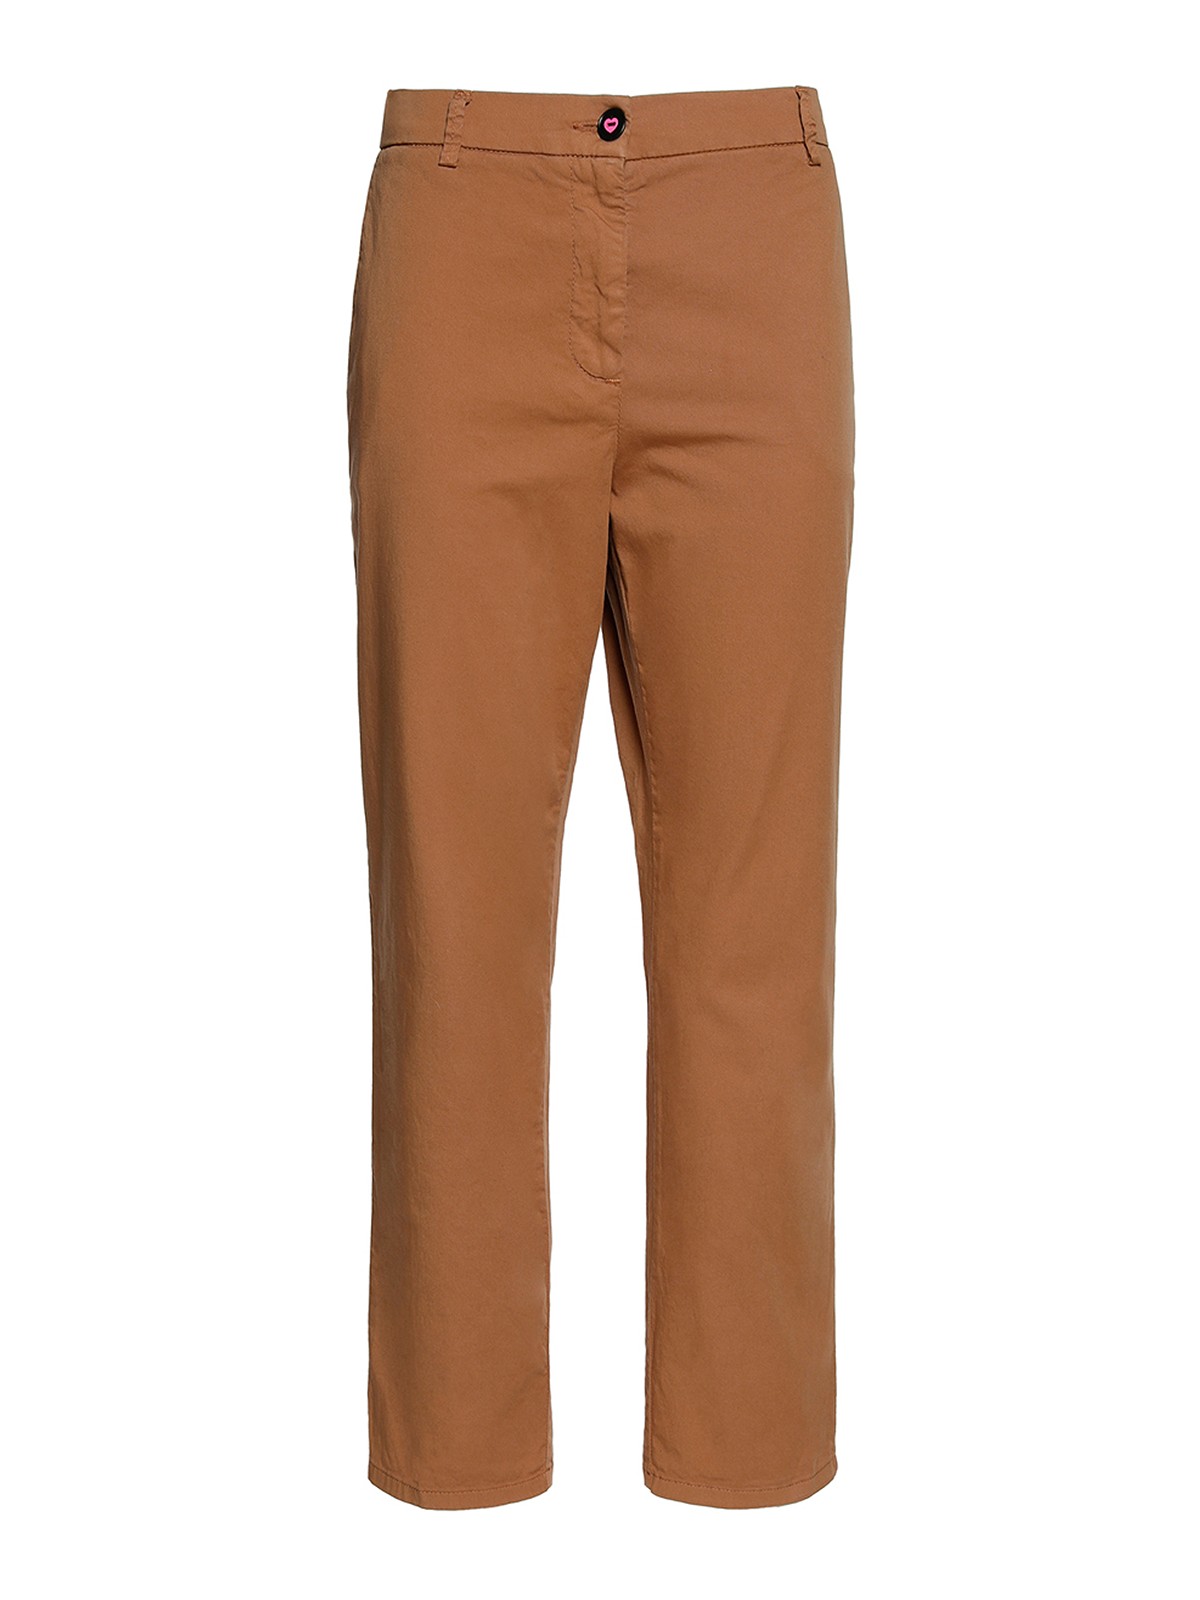 I Love My Pants Cotton Regular Fit Trousers In Brown